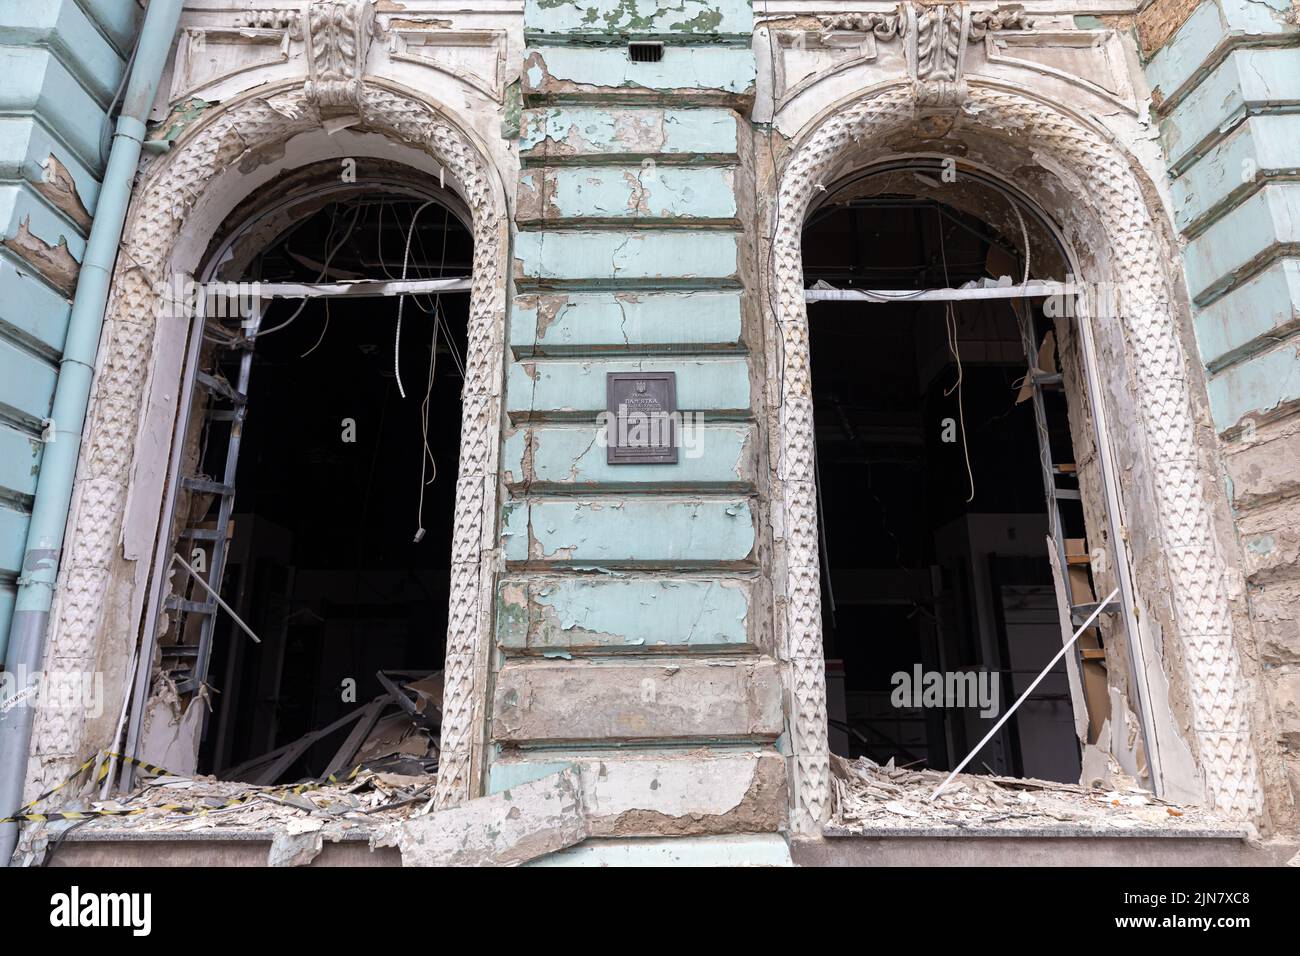 Damaged architectural monument of the city of Kharkiv. A commemorative plaque about the architectural value of the building is seen on the wall as well as broken windows due to Russian shelling in Kharkiv. (Photo by Mykhaylo Palinchak / SOPA Images/Sipa USA) Stock Photo